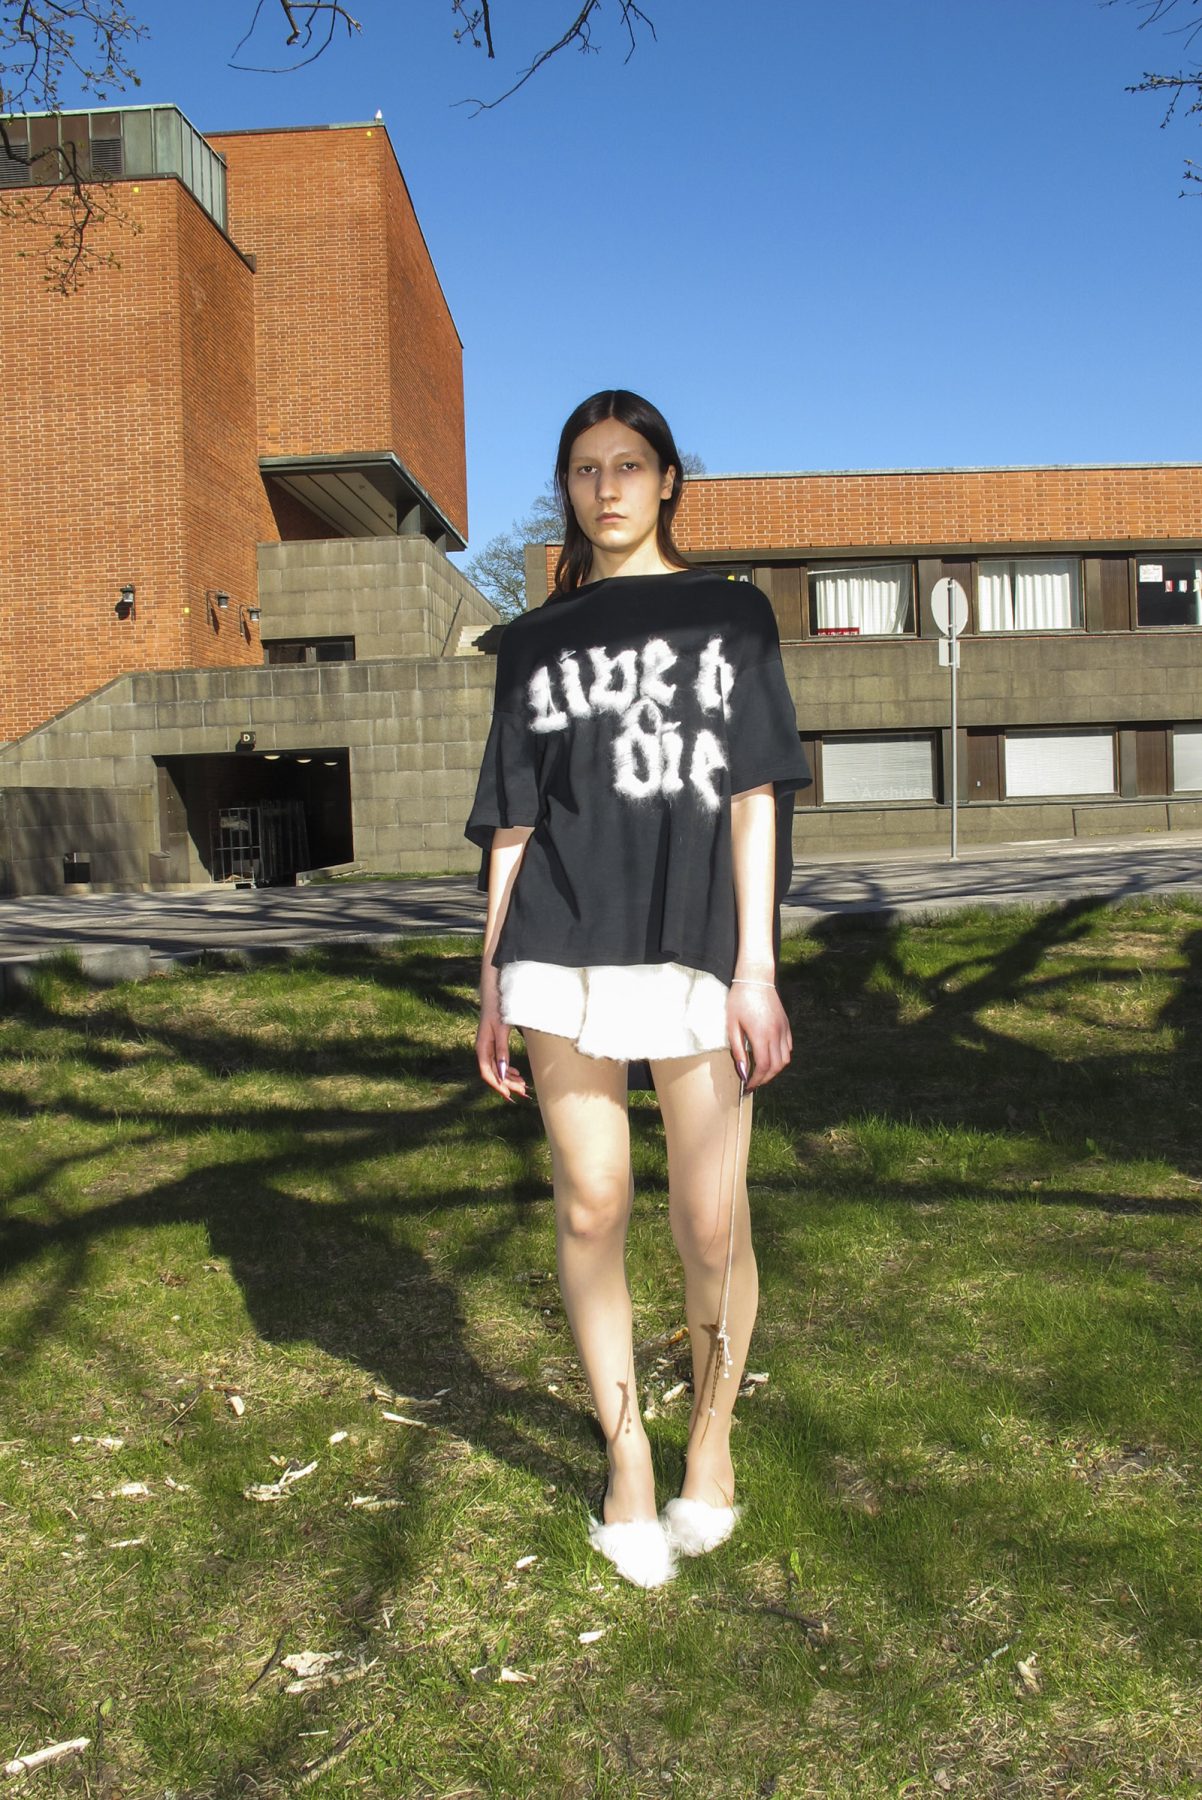 Model is wearing a black t-shirt with text and short white skirt